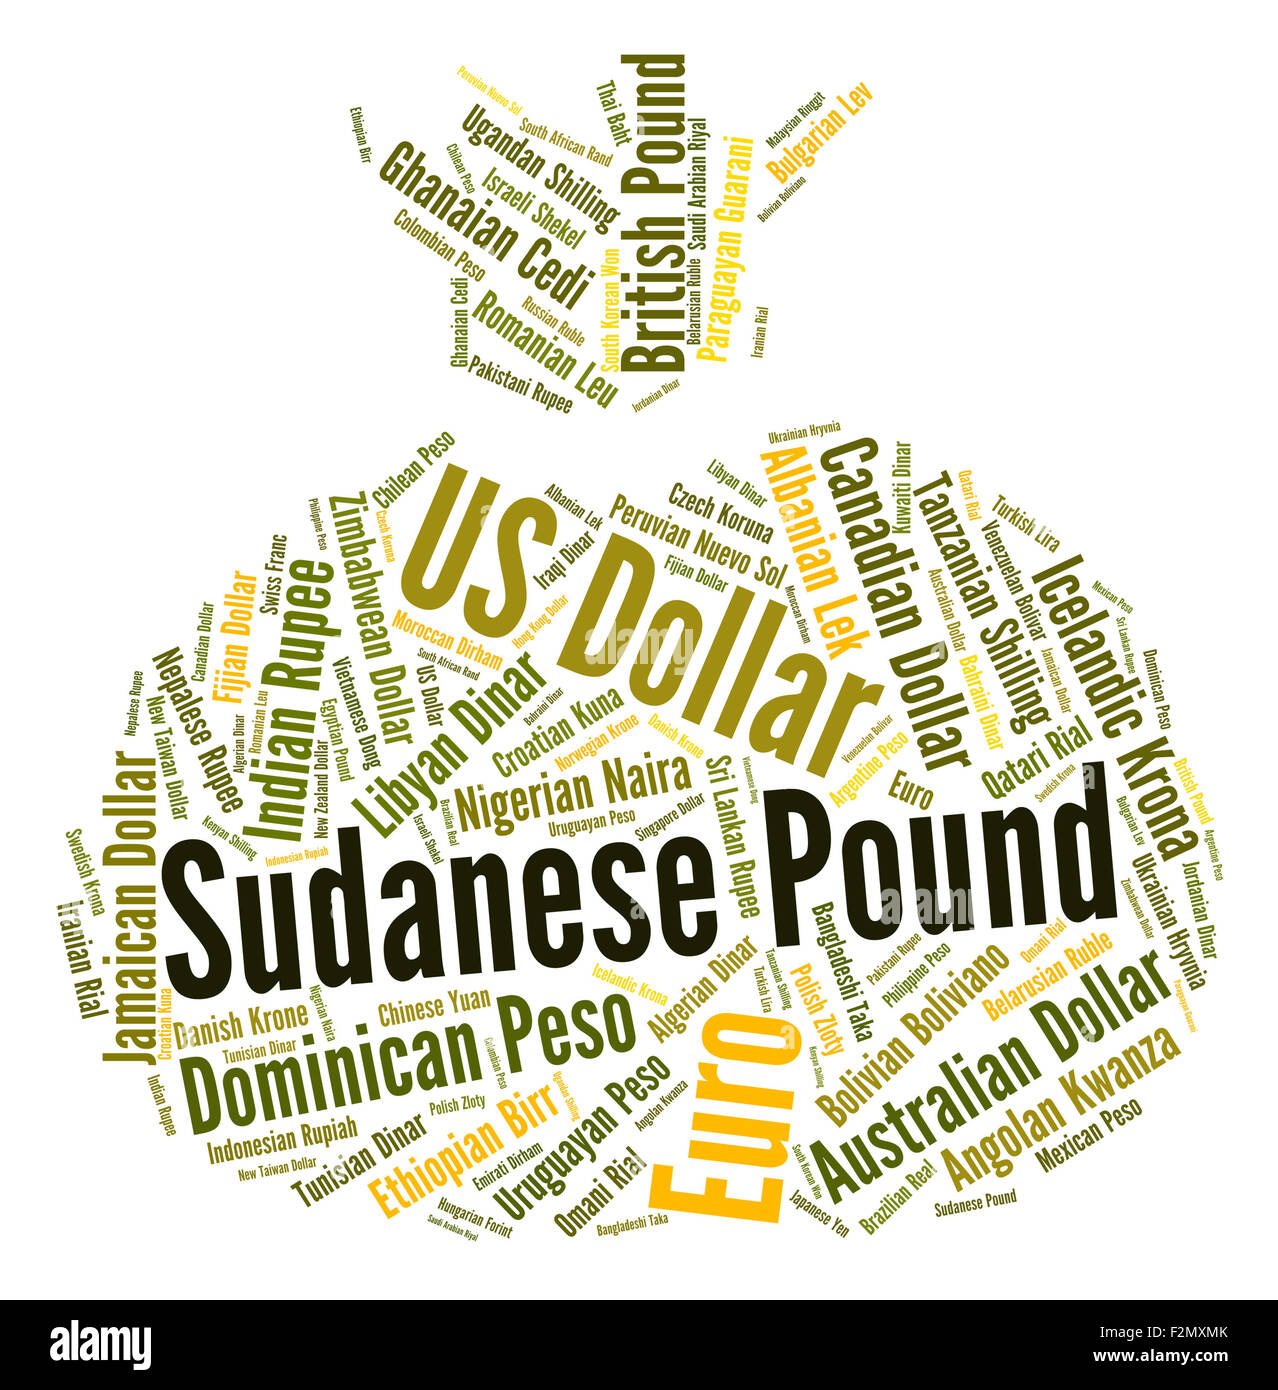 Sudanese Pound Representing Currency Exchange And Coinage Stock Photo